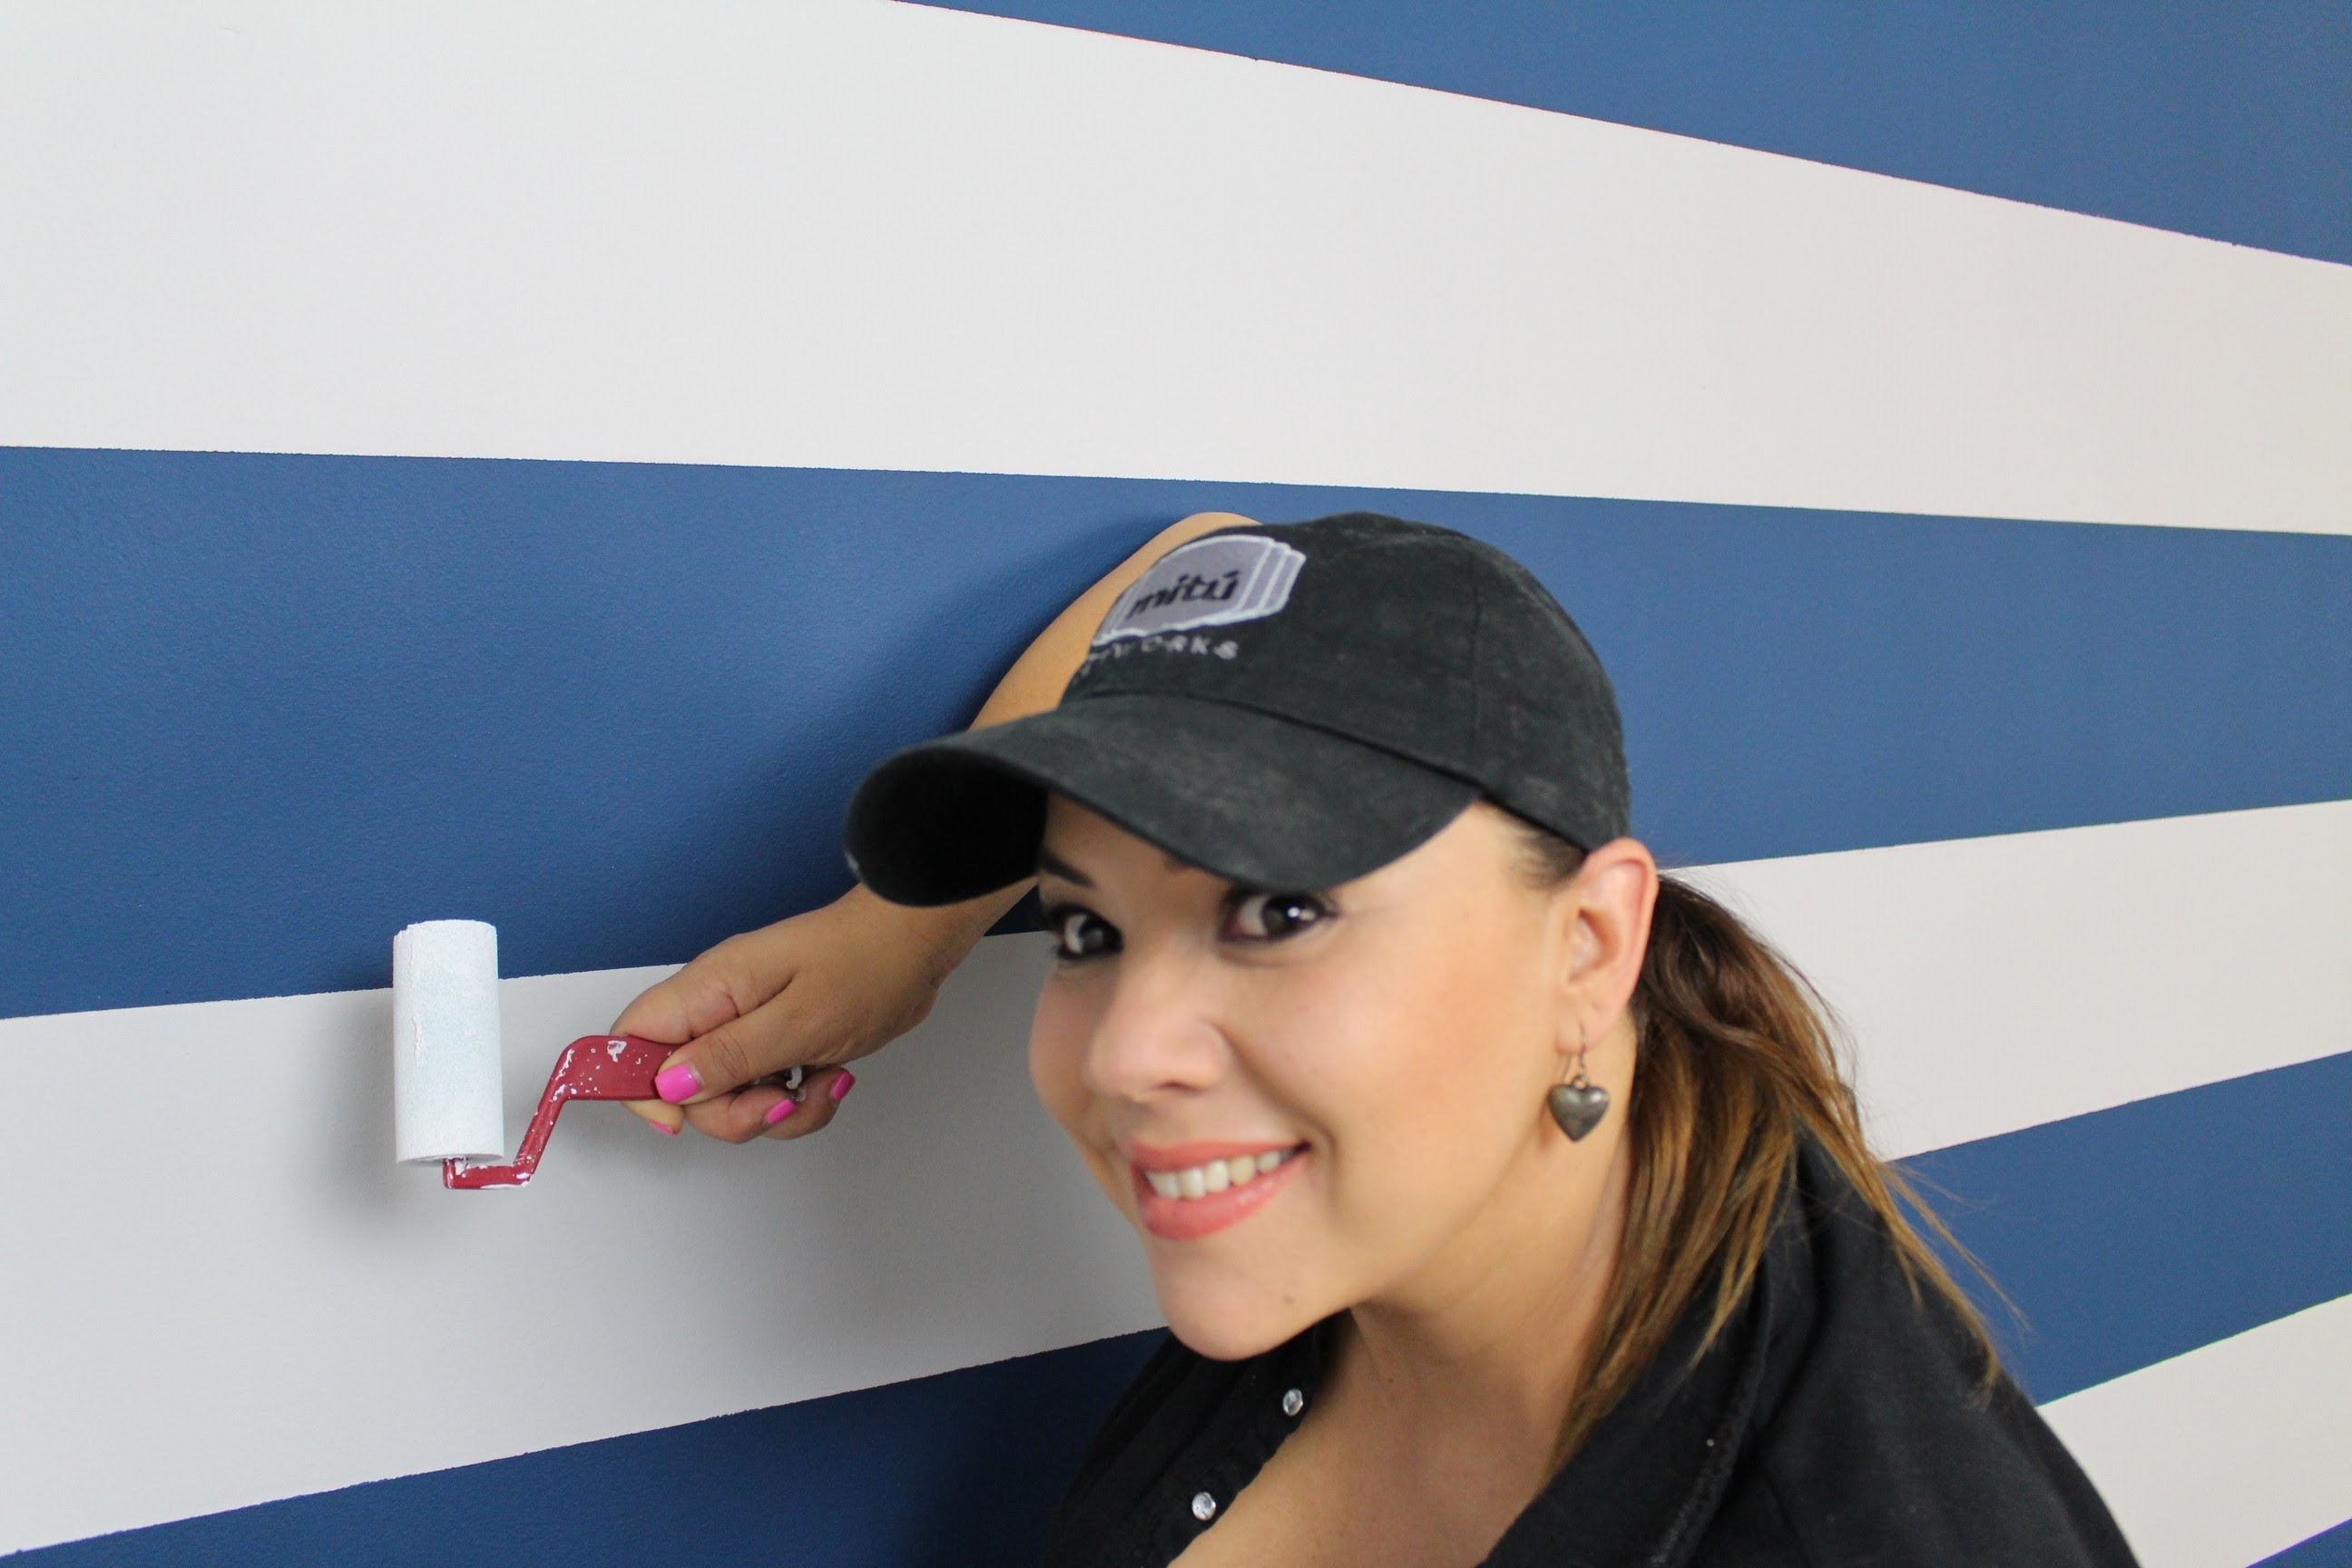 Como Pintar rayas en la pared. How to paint stripes on your walls